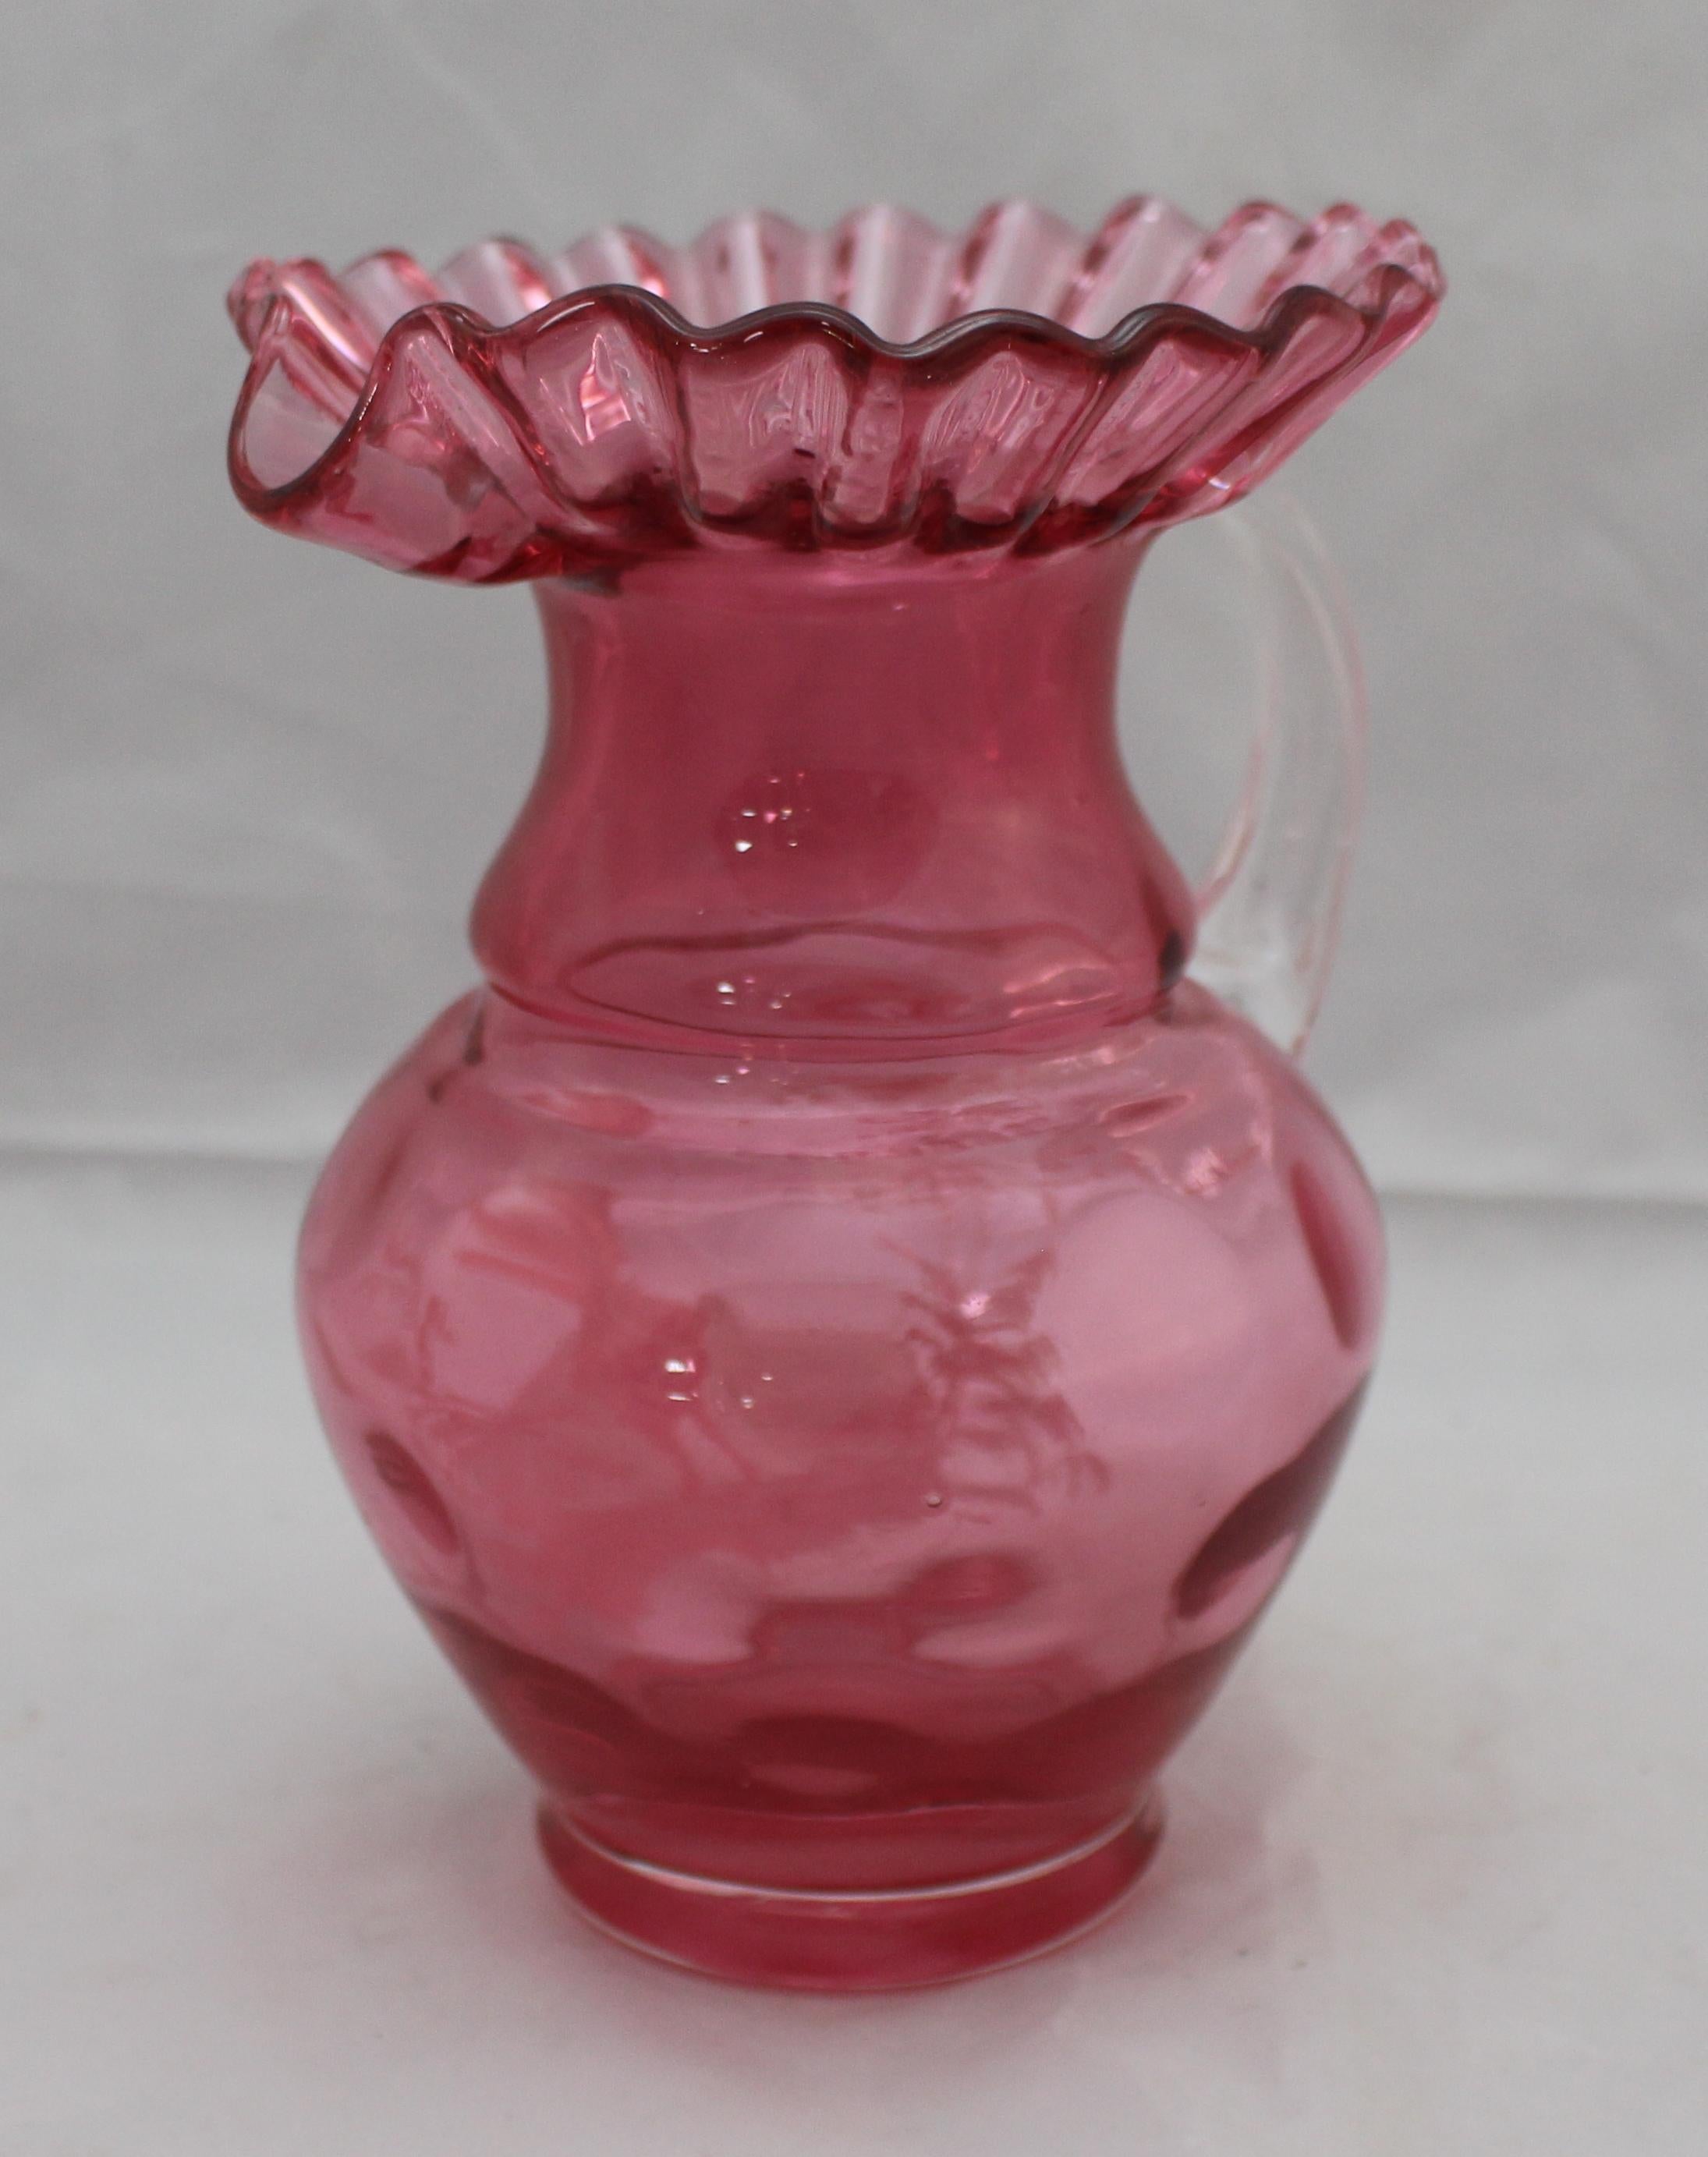 Period 19th century
Decoration cranberry glass, Mary Gregory painting
Measures: Width 15 cm / 6 in
Depth 12 cm / 4 3/4 in
Height 19 cm / 7 1/2 in.
Condition: Very good original condition. No chips or cracks. A few small air bubbles to glass as